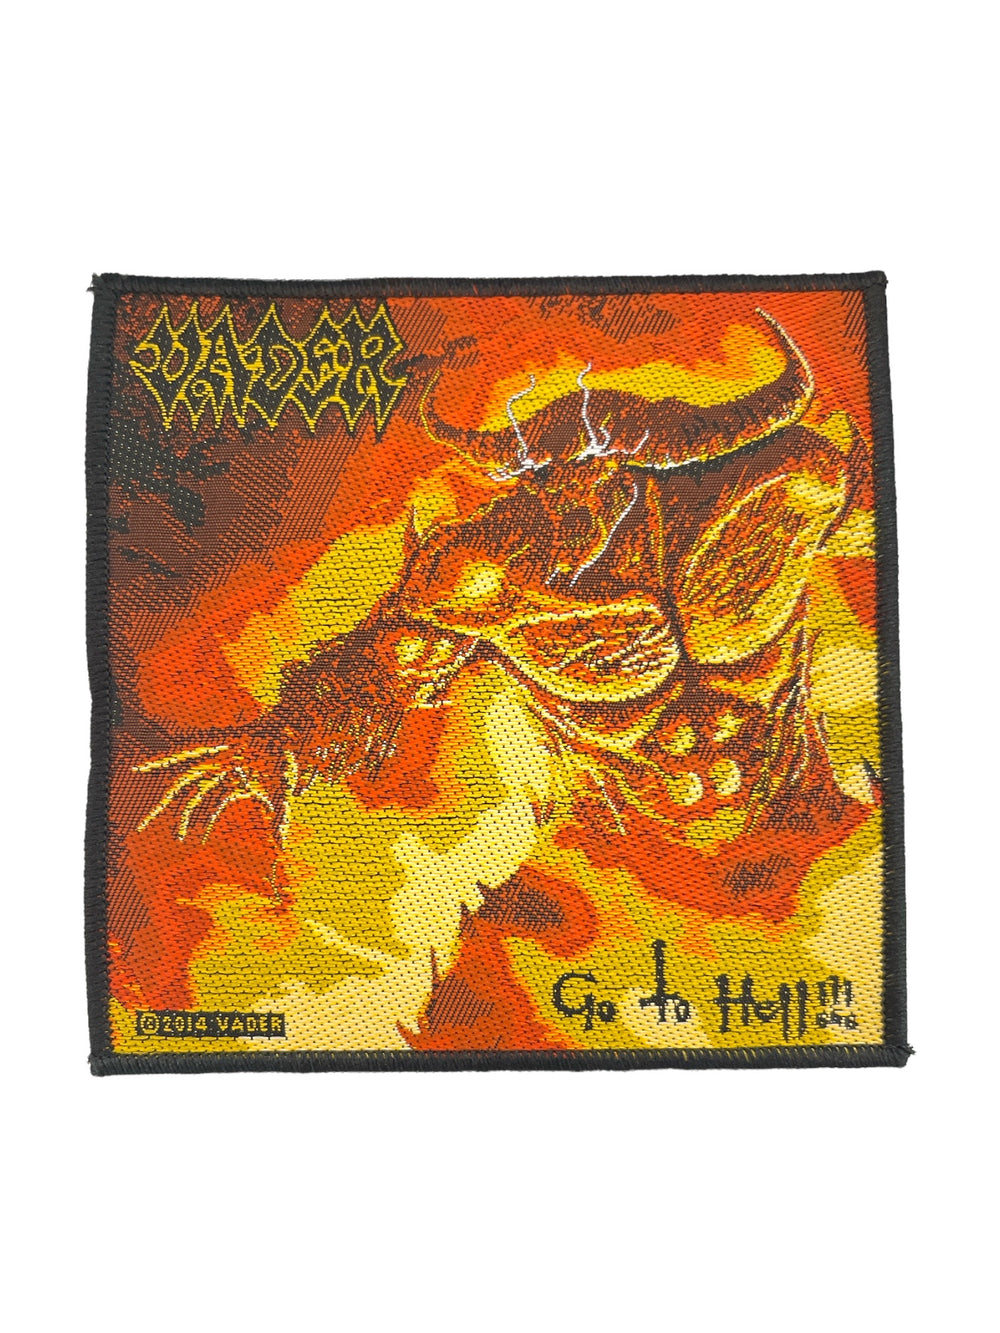 Vader Standard Patch: Go to Hell Woven Patch Brand New